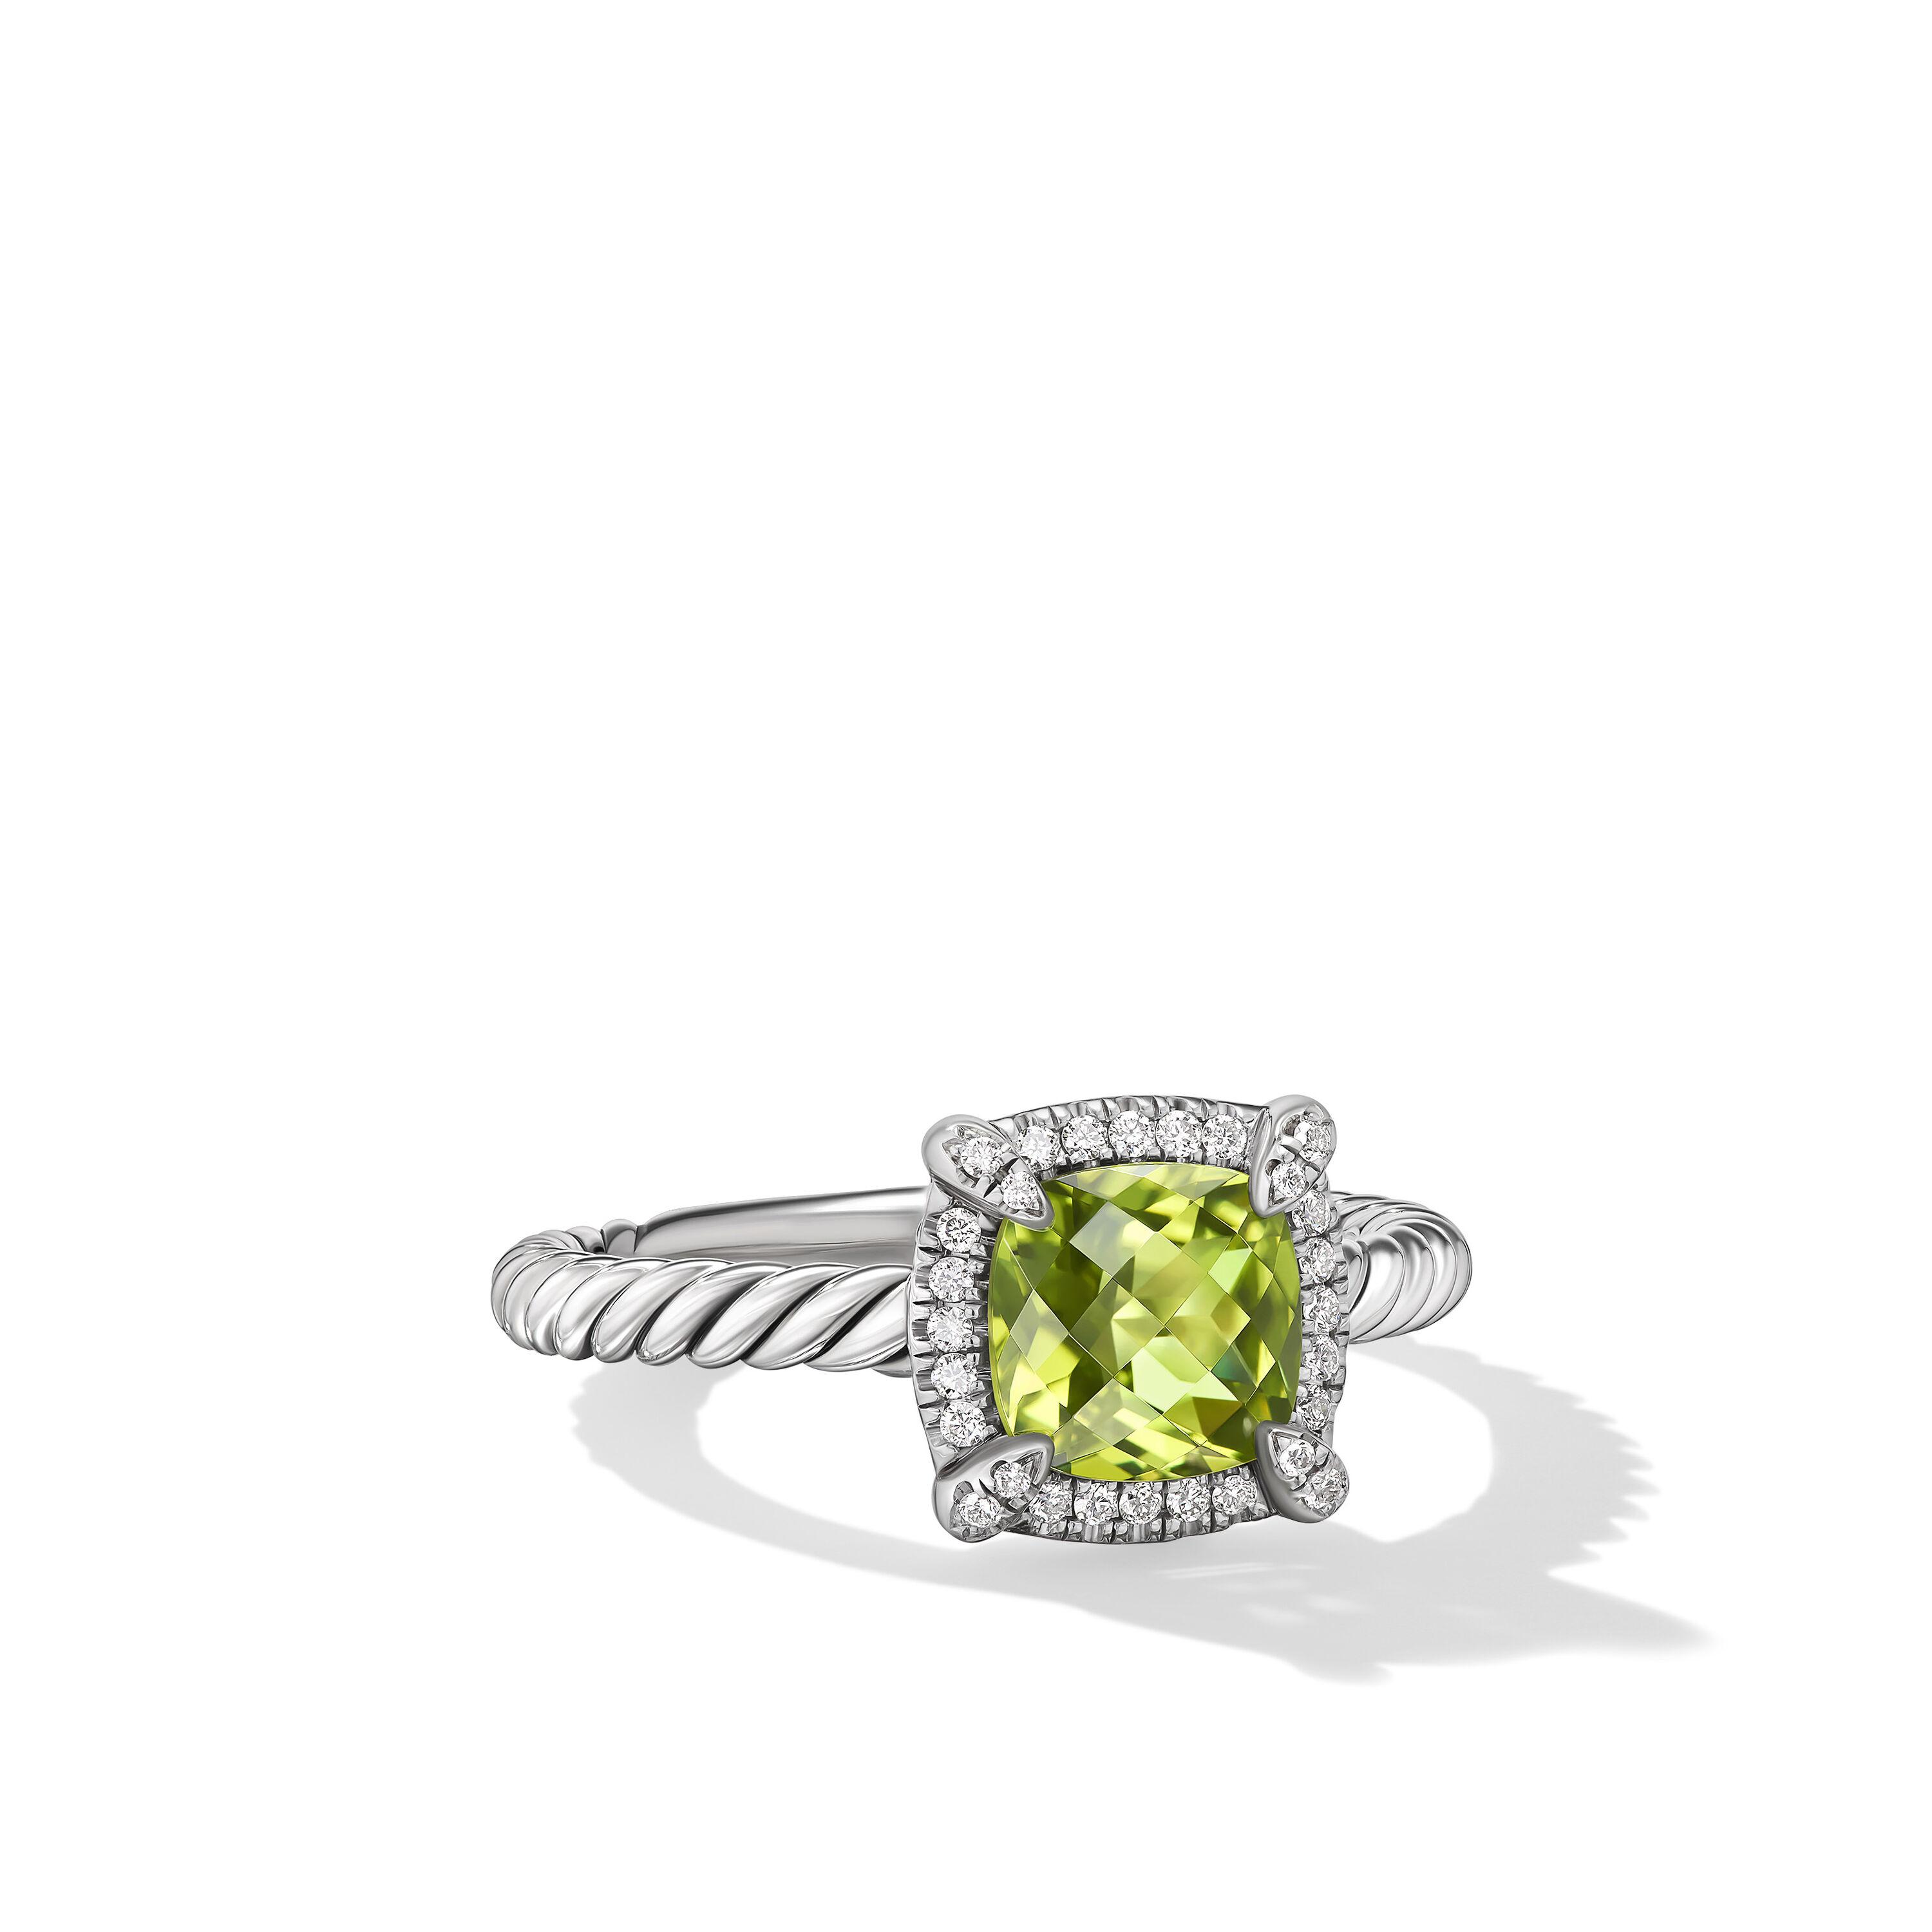 David Yurman Petite Chatelaine Pave Bezel Ring in Sterling Silver with Peridot and Diamonds, Size 6.5